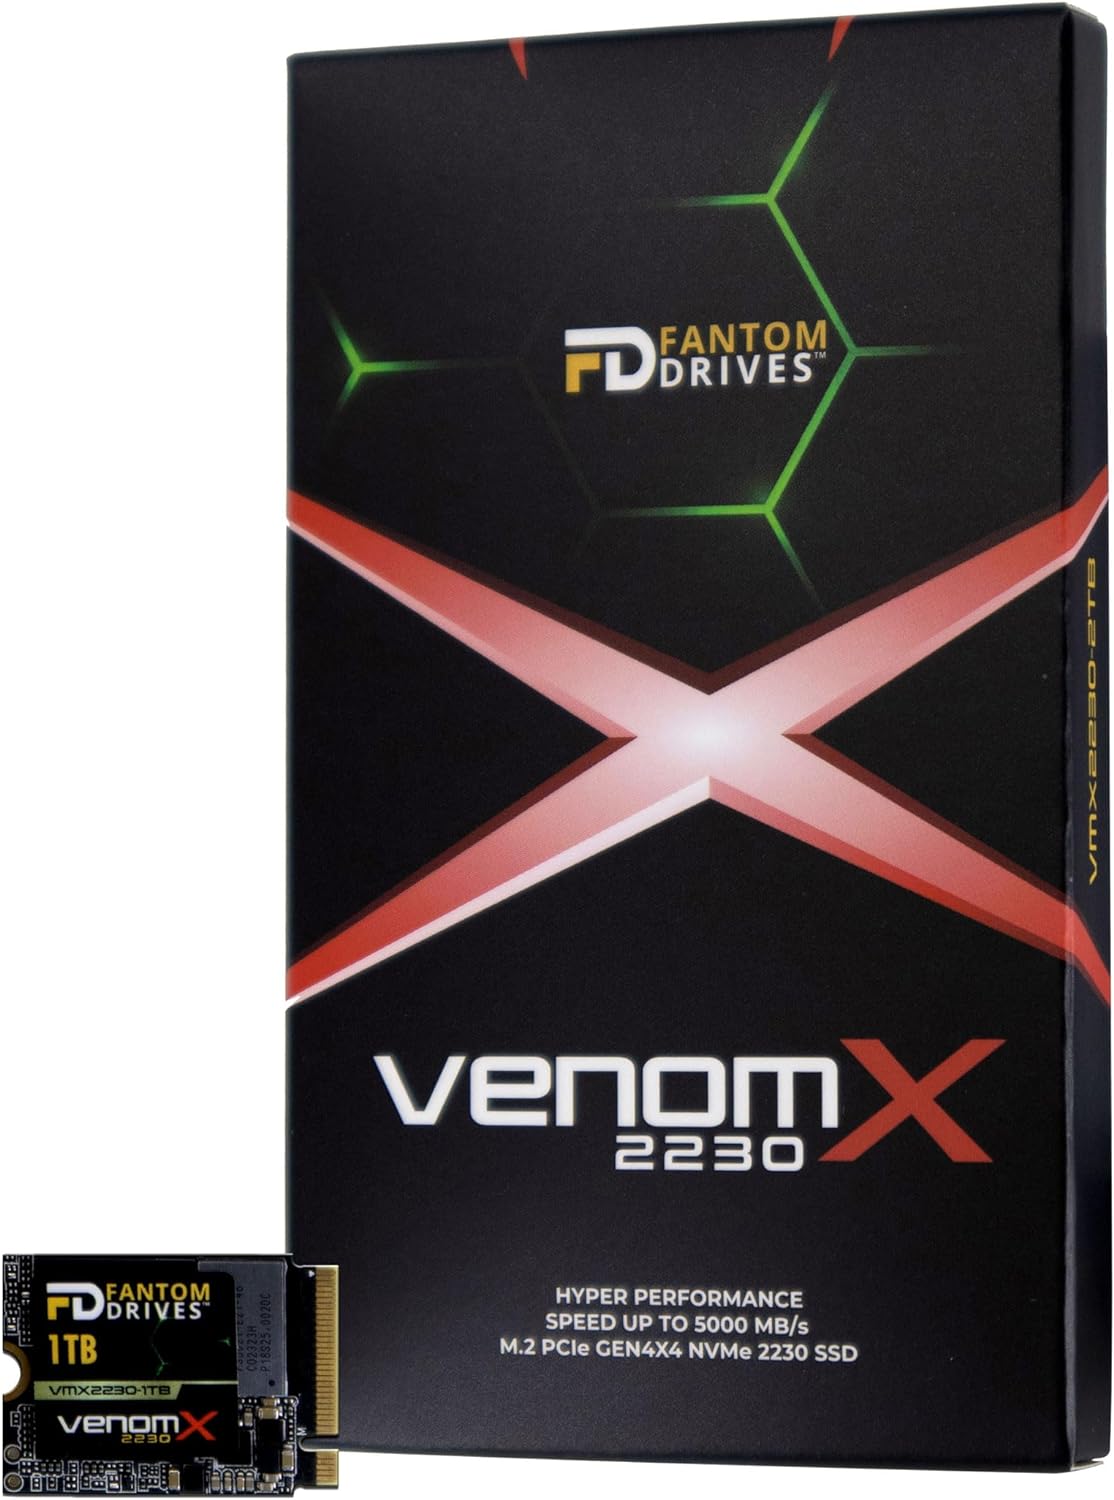 Fantom Drives VenomX 1TB High Performance M.2 2230 NVMe SSD, PCIe Gen4 x 4, Compatible with Steam Deck, ASUS ROG Ally, Mini PCs, Read speeds up to 5100MB/s (VMX2230-1TB)